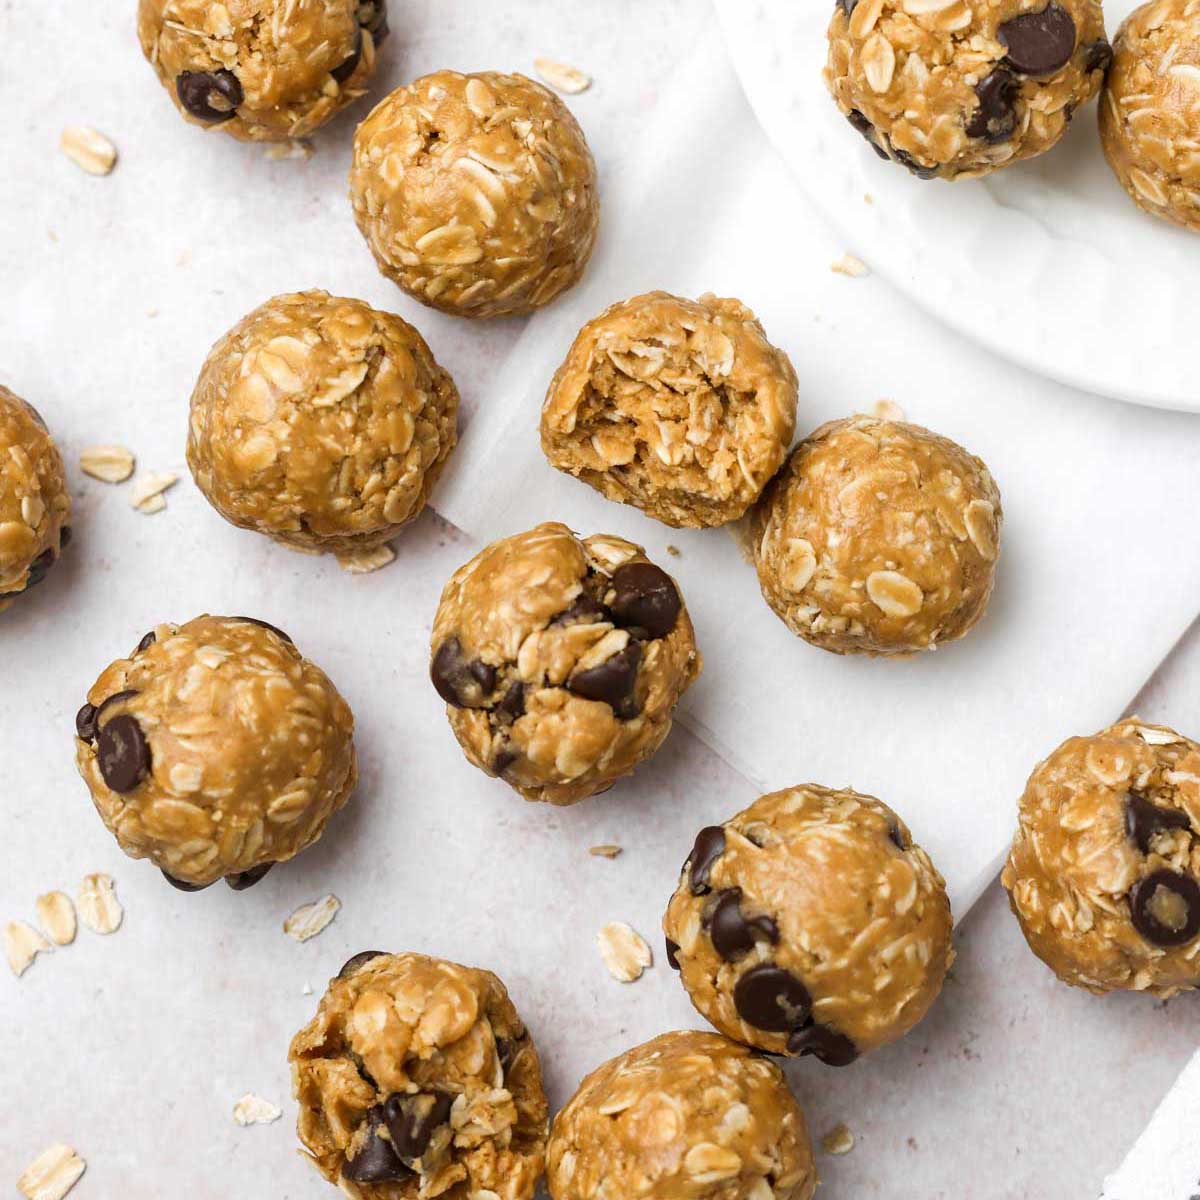 3-Ingredient Peanut Butter Oatmeal Balls (10 Minutes)